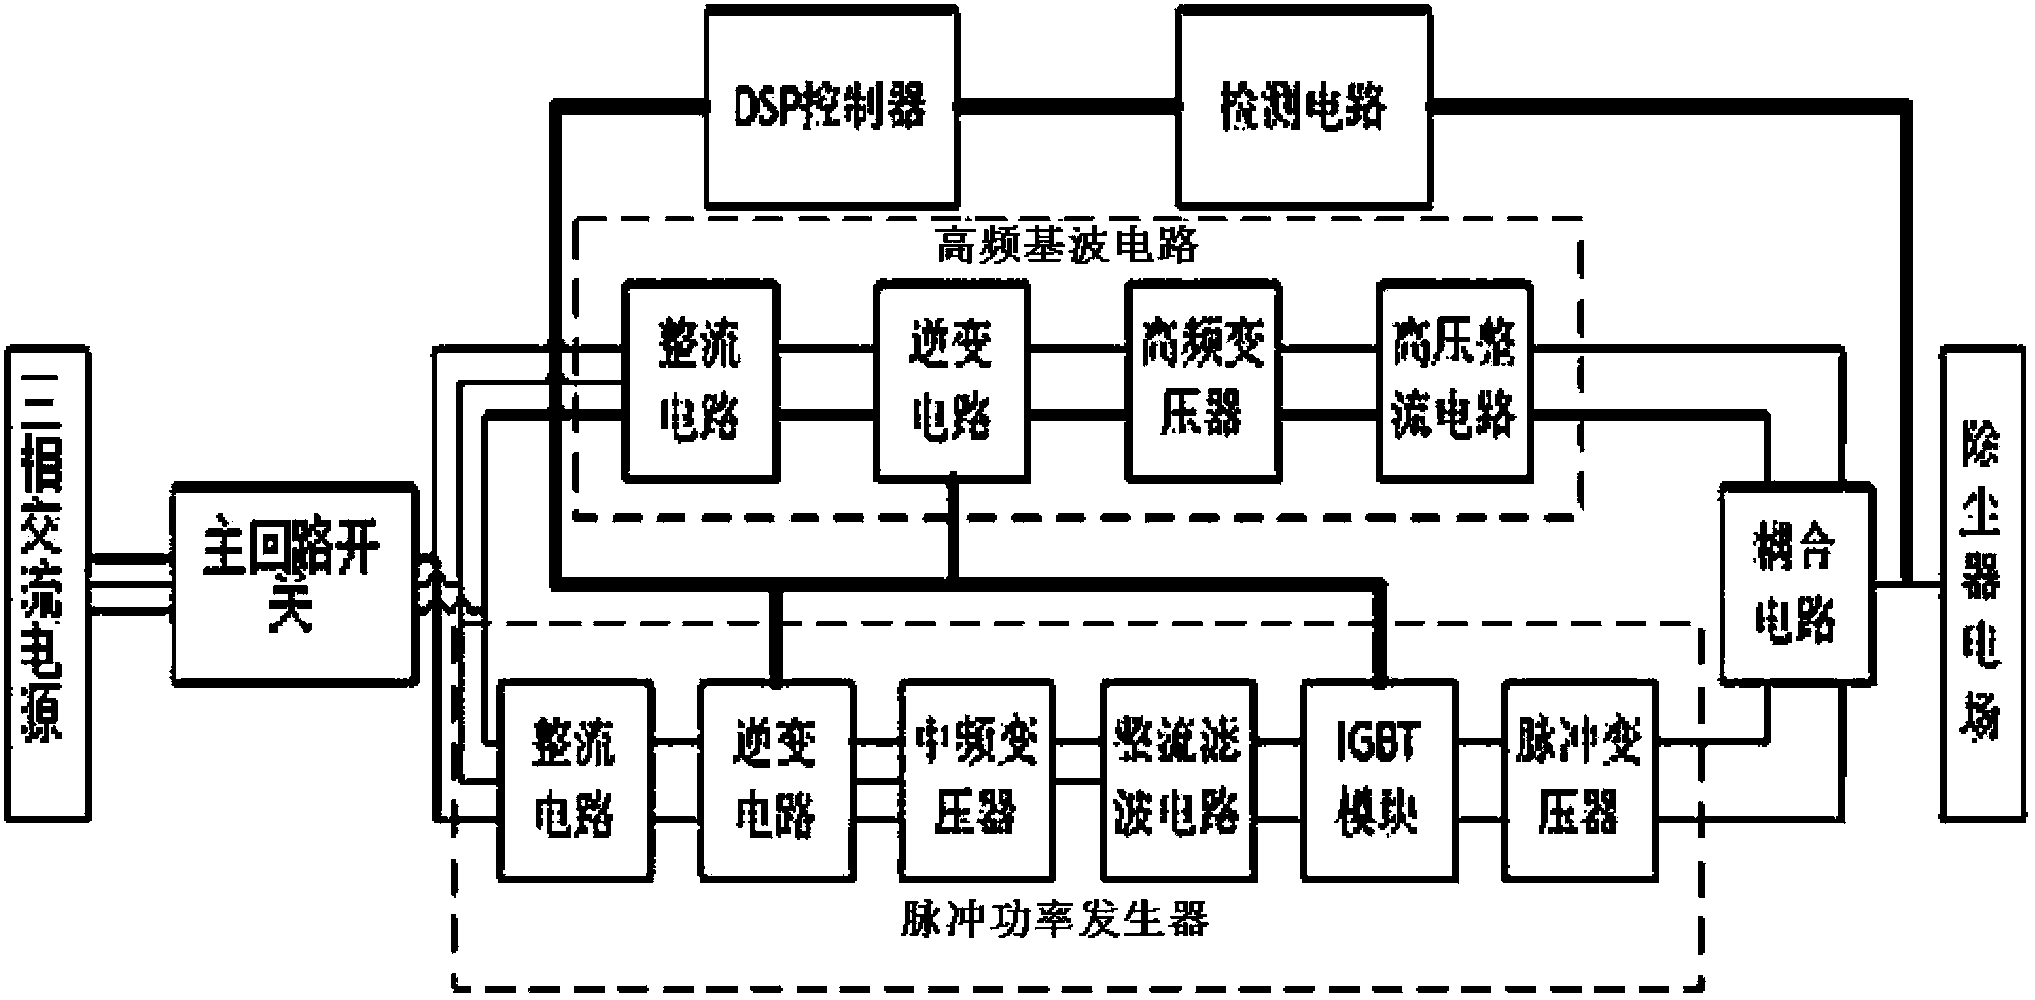 High frequency pulse power supply for electric dedusting